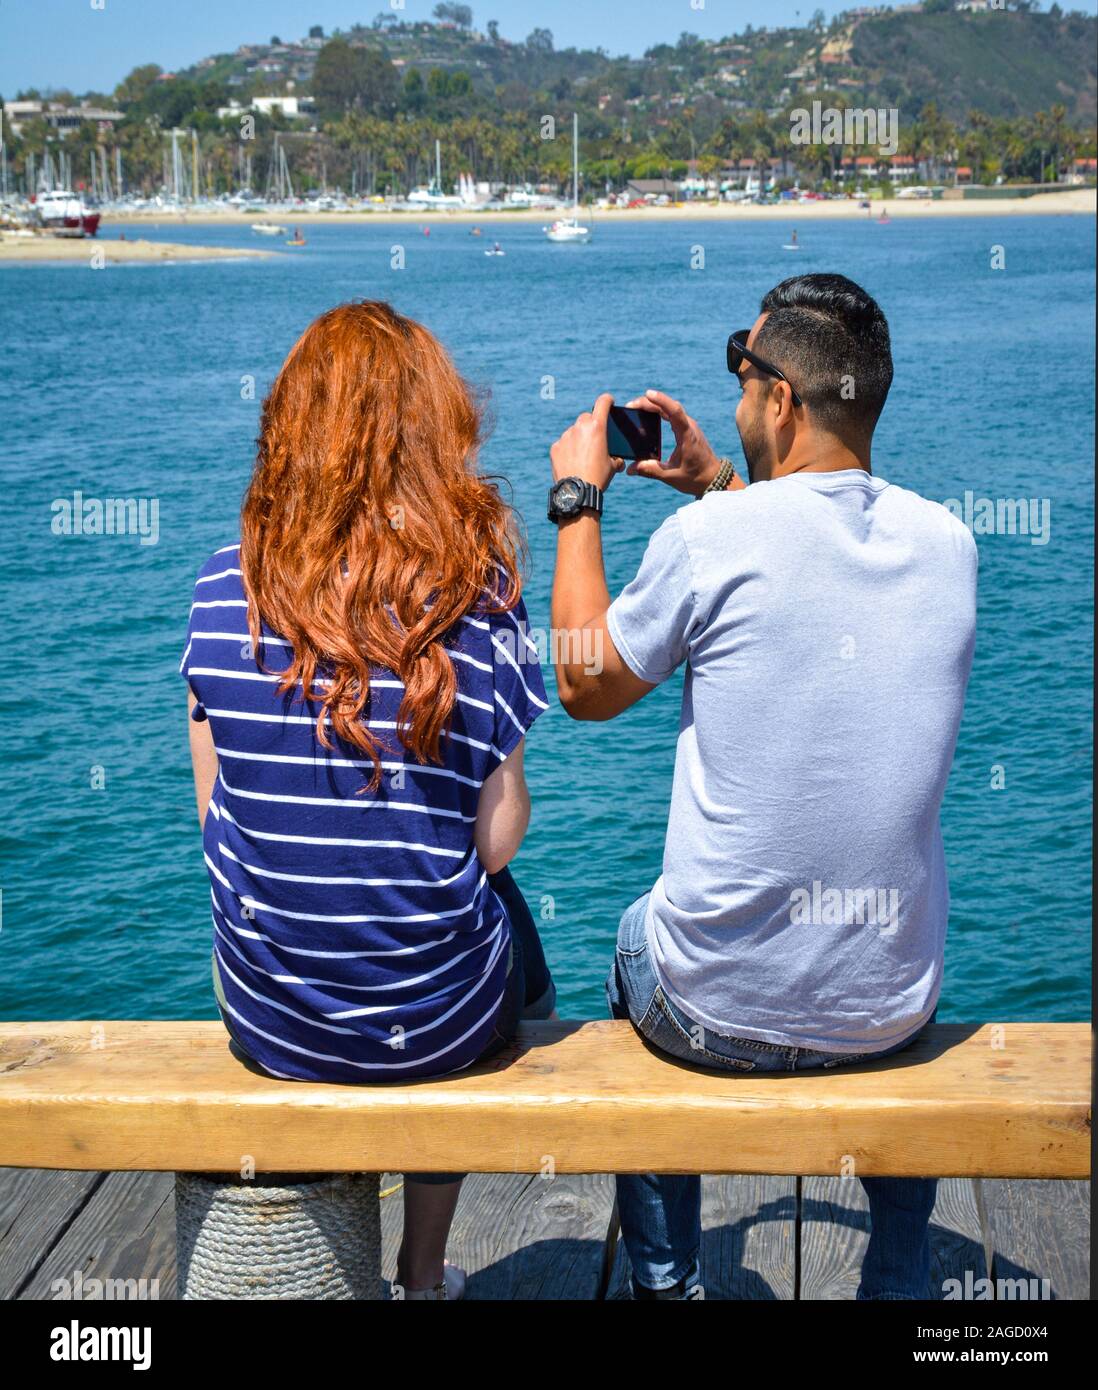 A rear view of a seated red headed young woman sitting alongside a young man using his camera phone from a pier at the harbor in Santa Barbara, CA Stock Photo